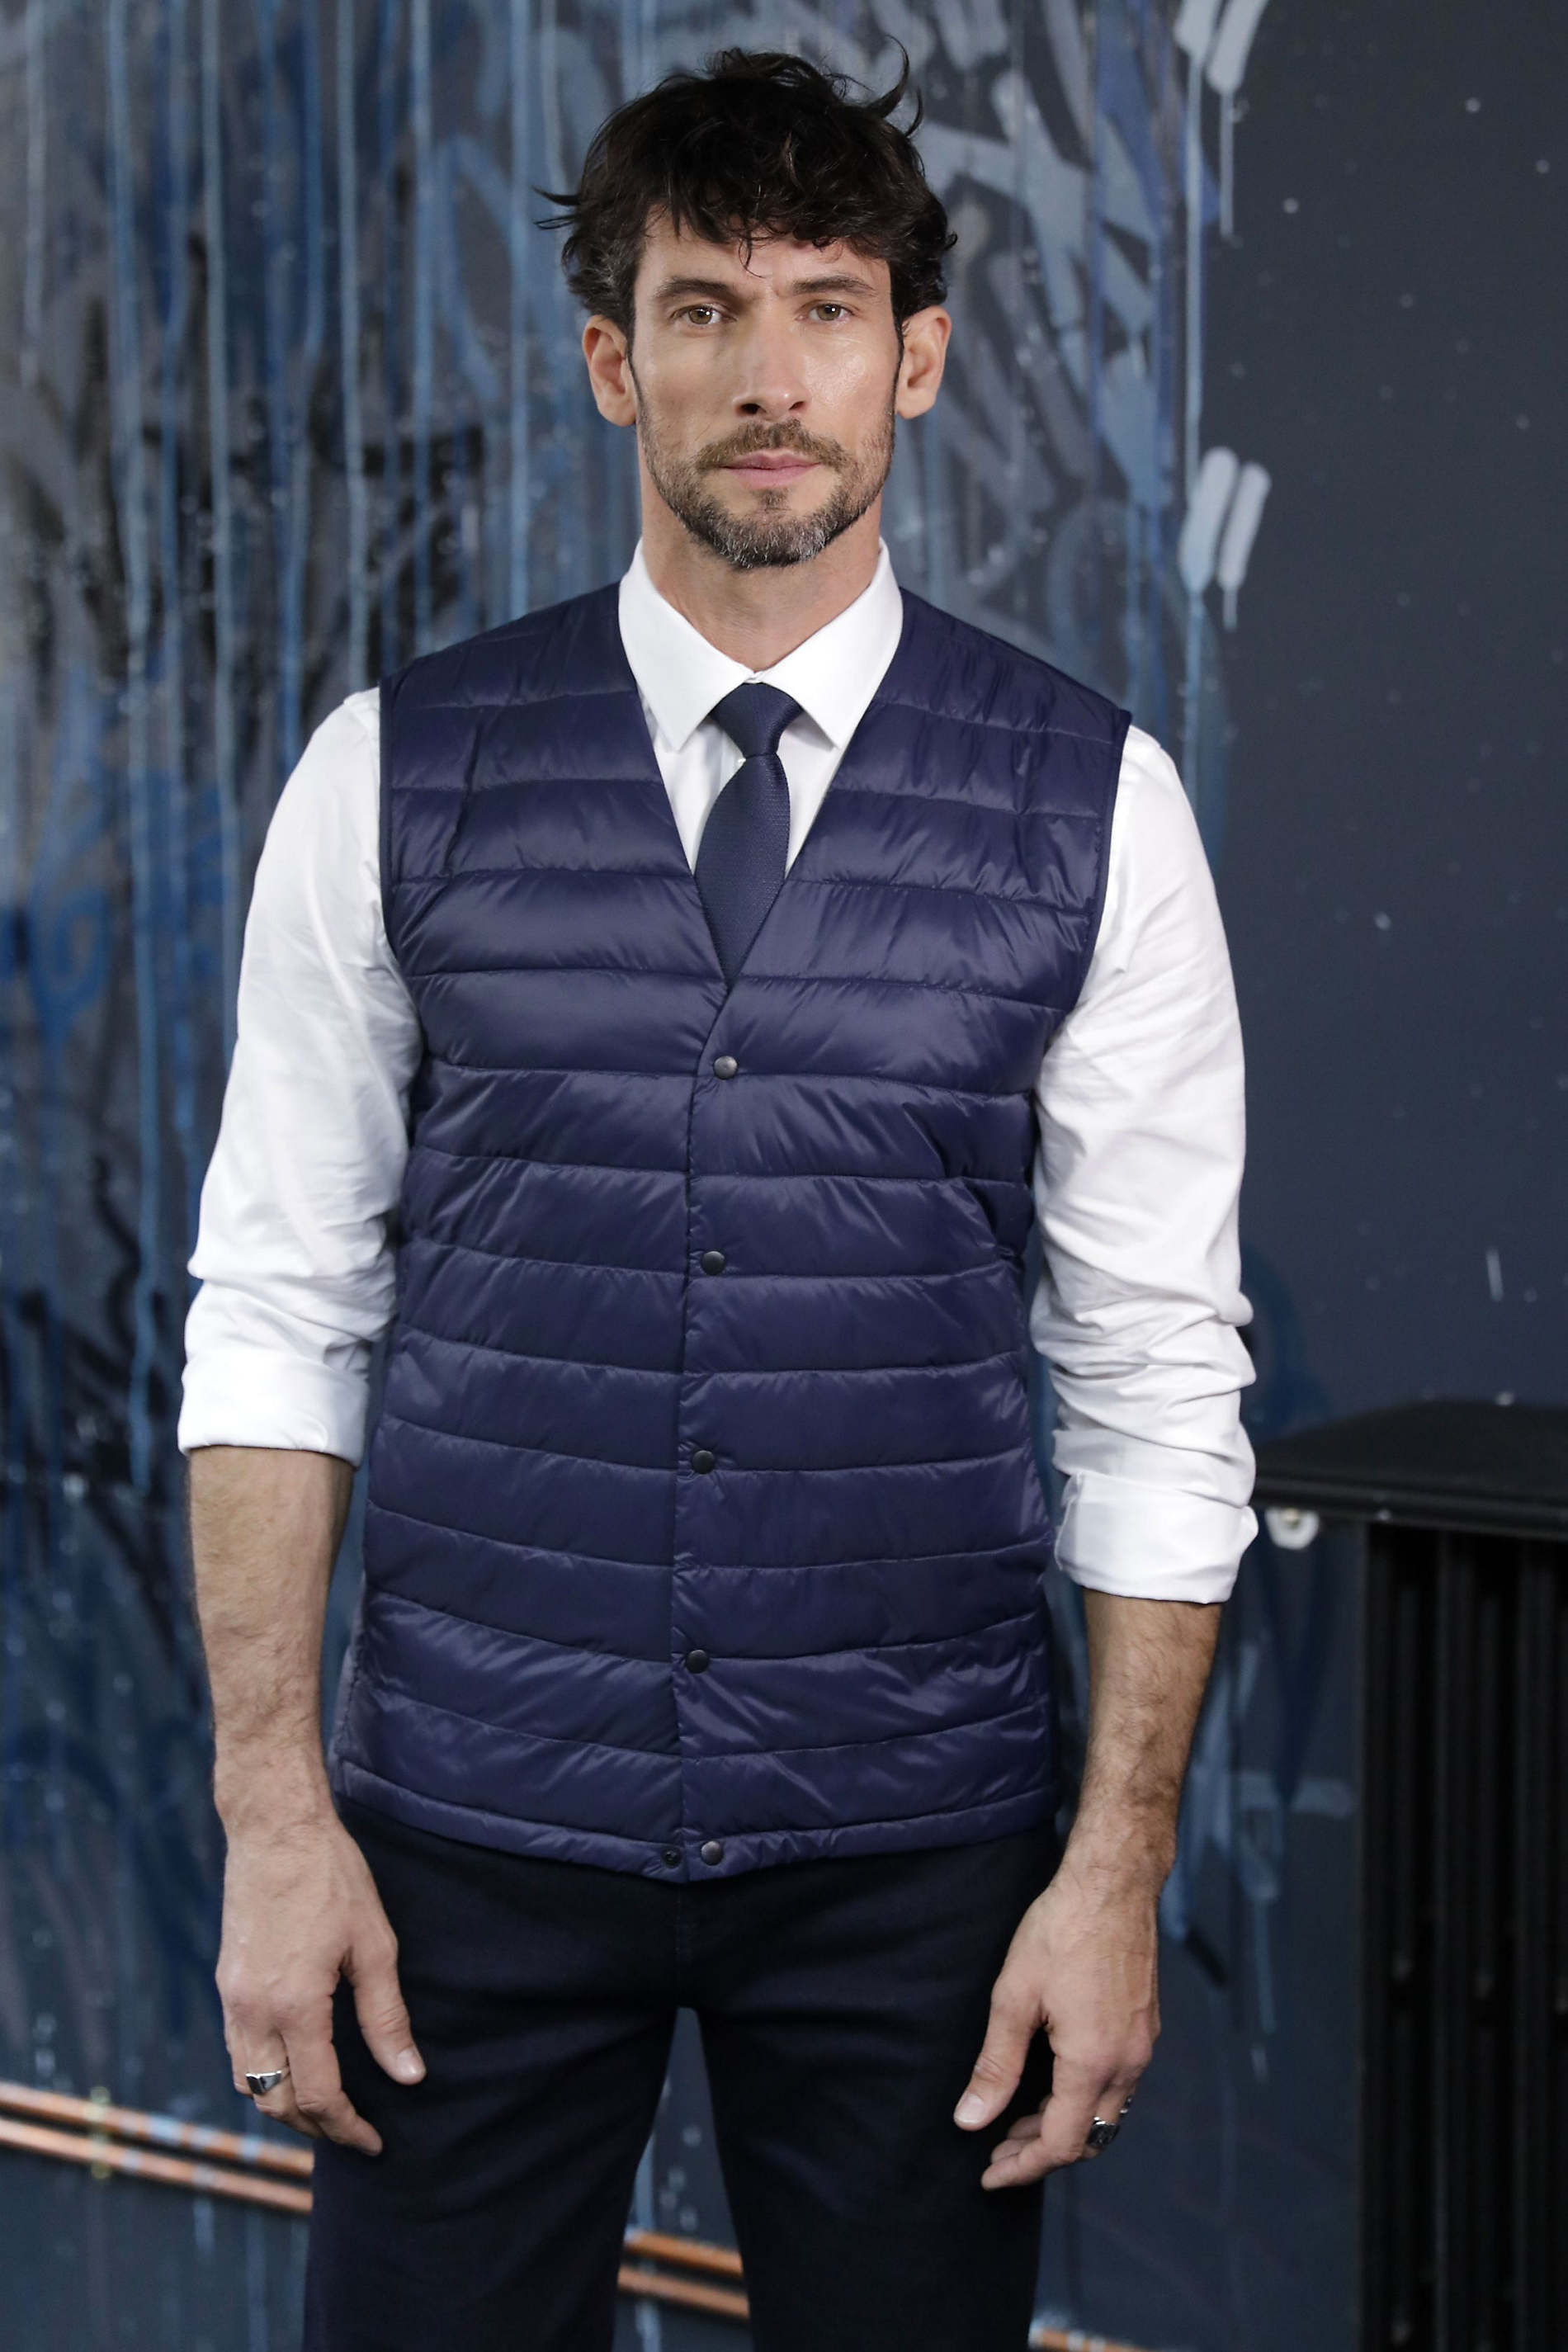 MEN'S LIGHTWEIGHT BODYWARMER<p>Ultralight and warm, this bodywarmer has been carefully designed to be suitable for all seasons and activities. It can be worn by itself or layered with other garments since it is quite thin. Bonus: it comes with a carry bag.</p> NEOBLU ARTHUR MEN